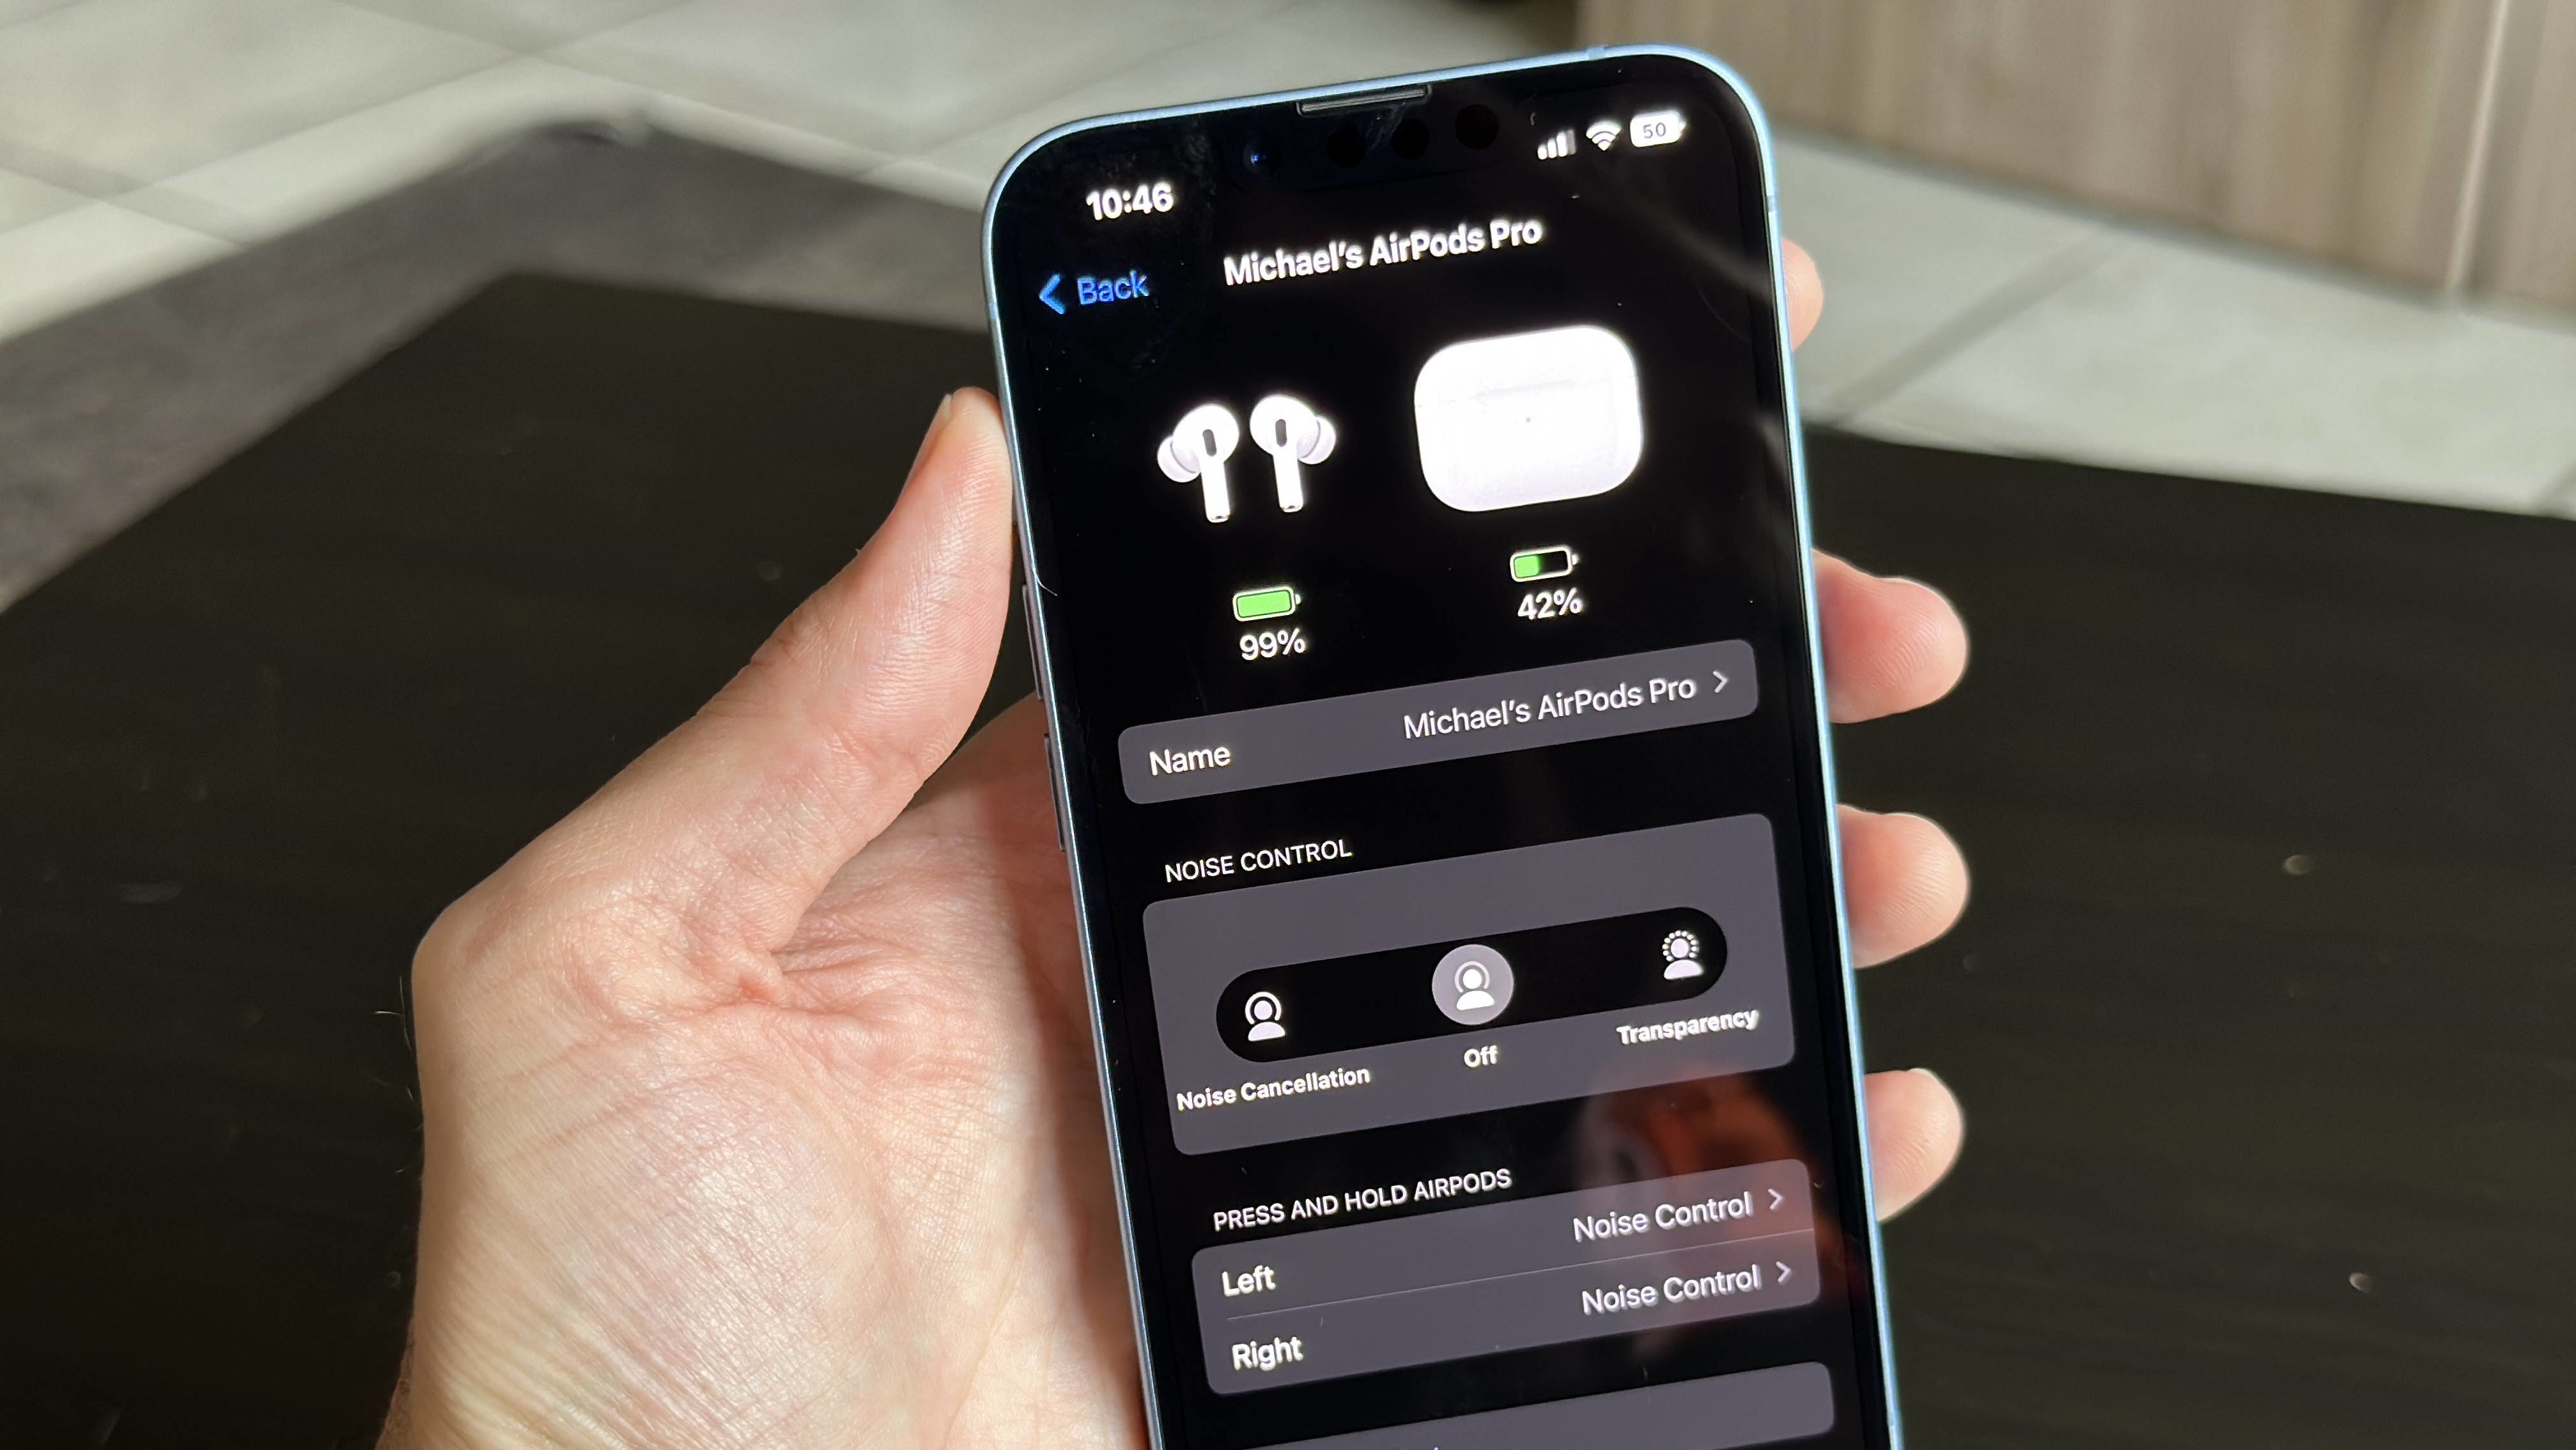 How to customize the settings for your AirPods or AirPods Pro